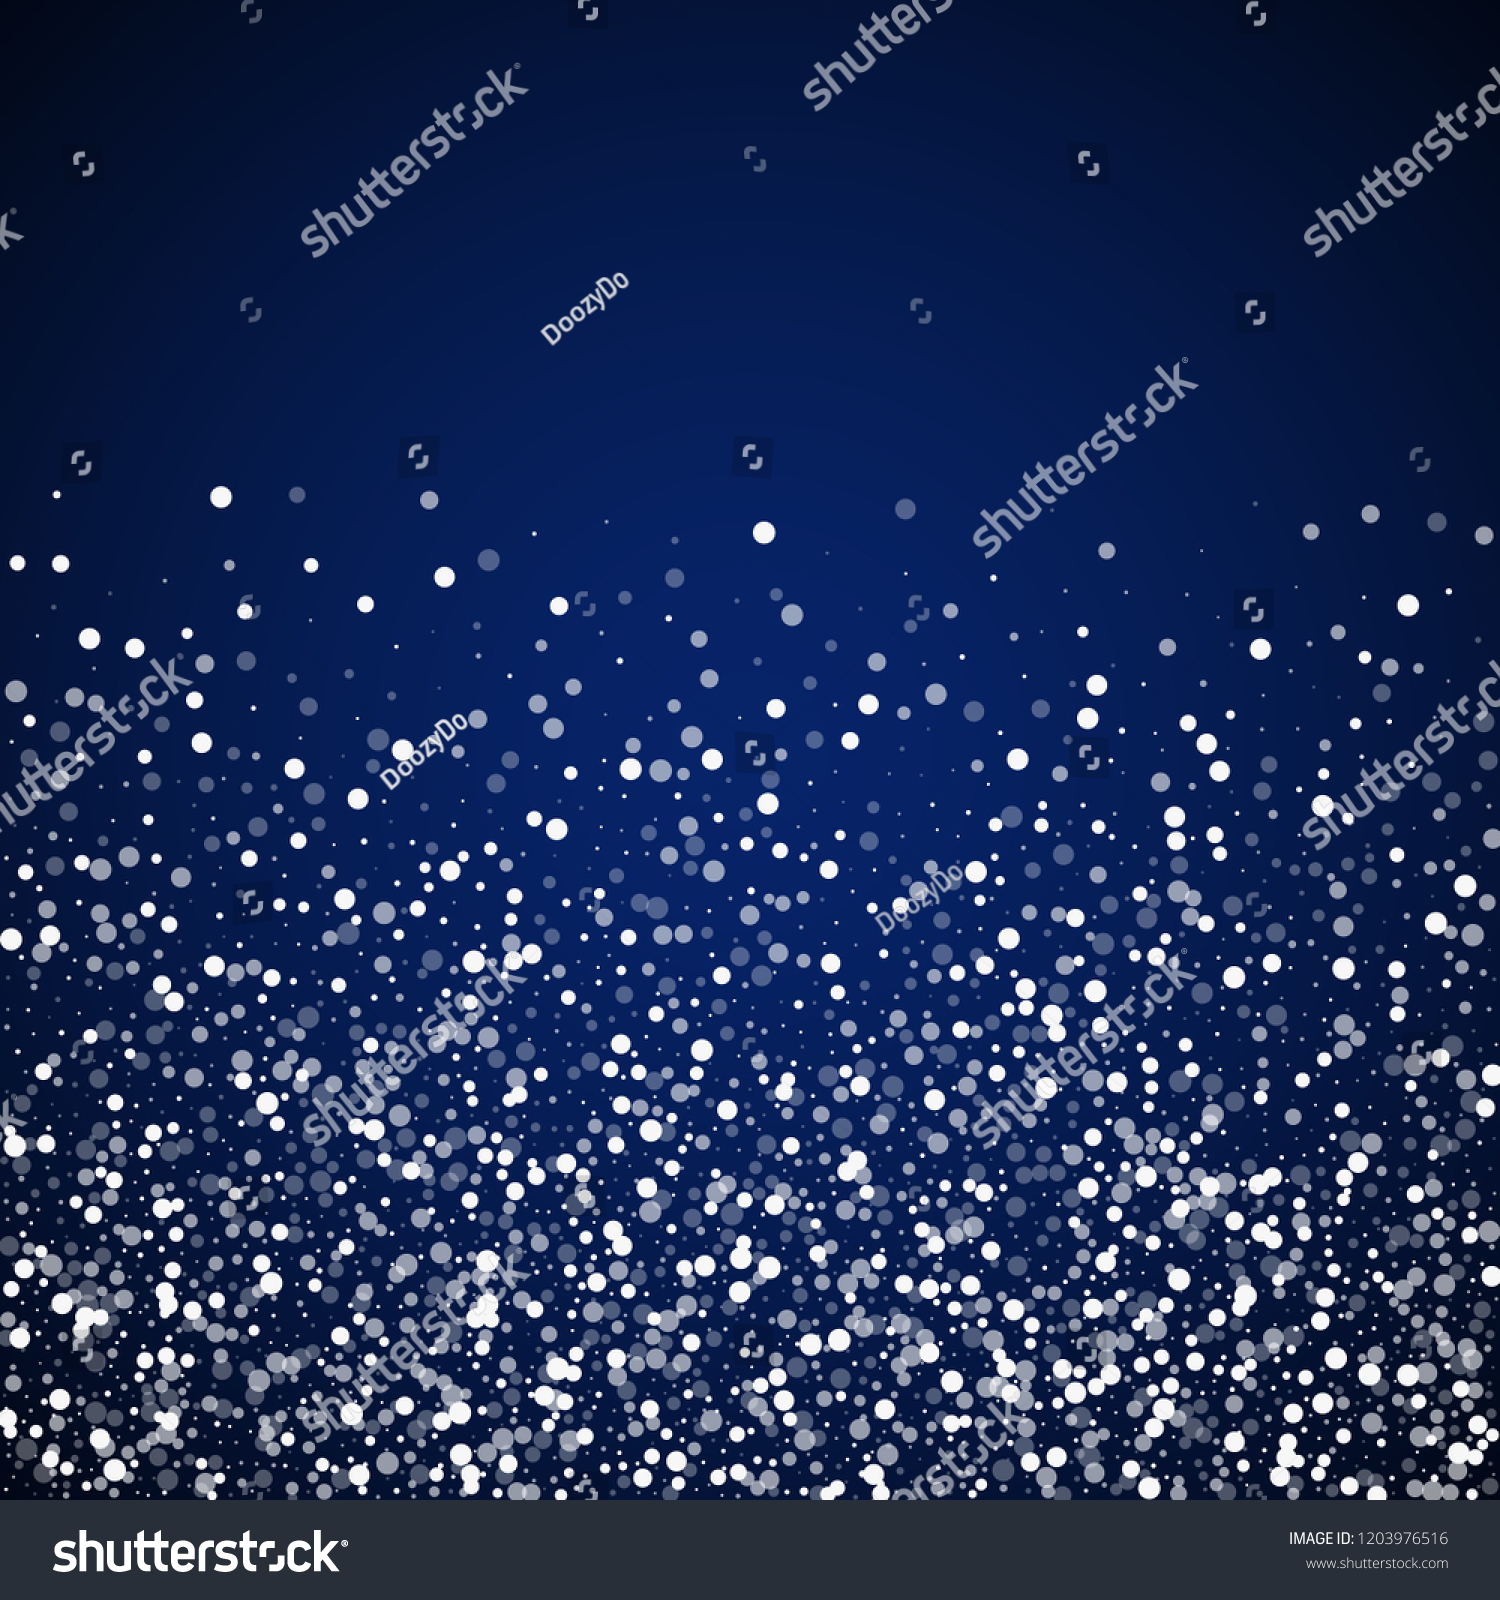 17,296 Blue background with silver confetti Stock Illustrations, Images ...